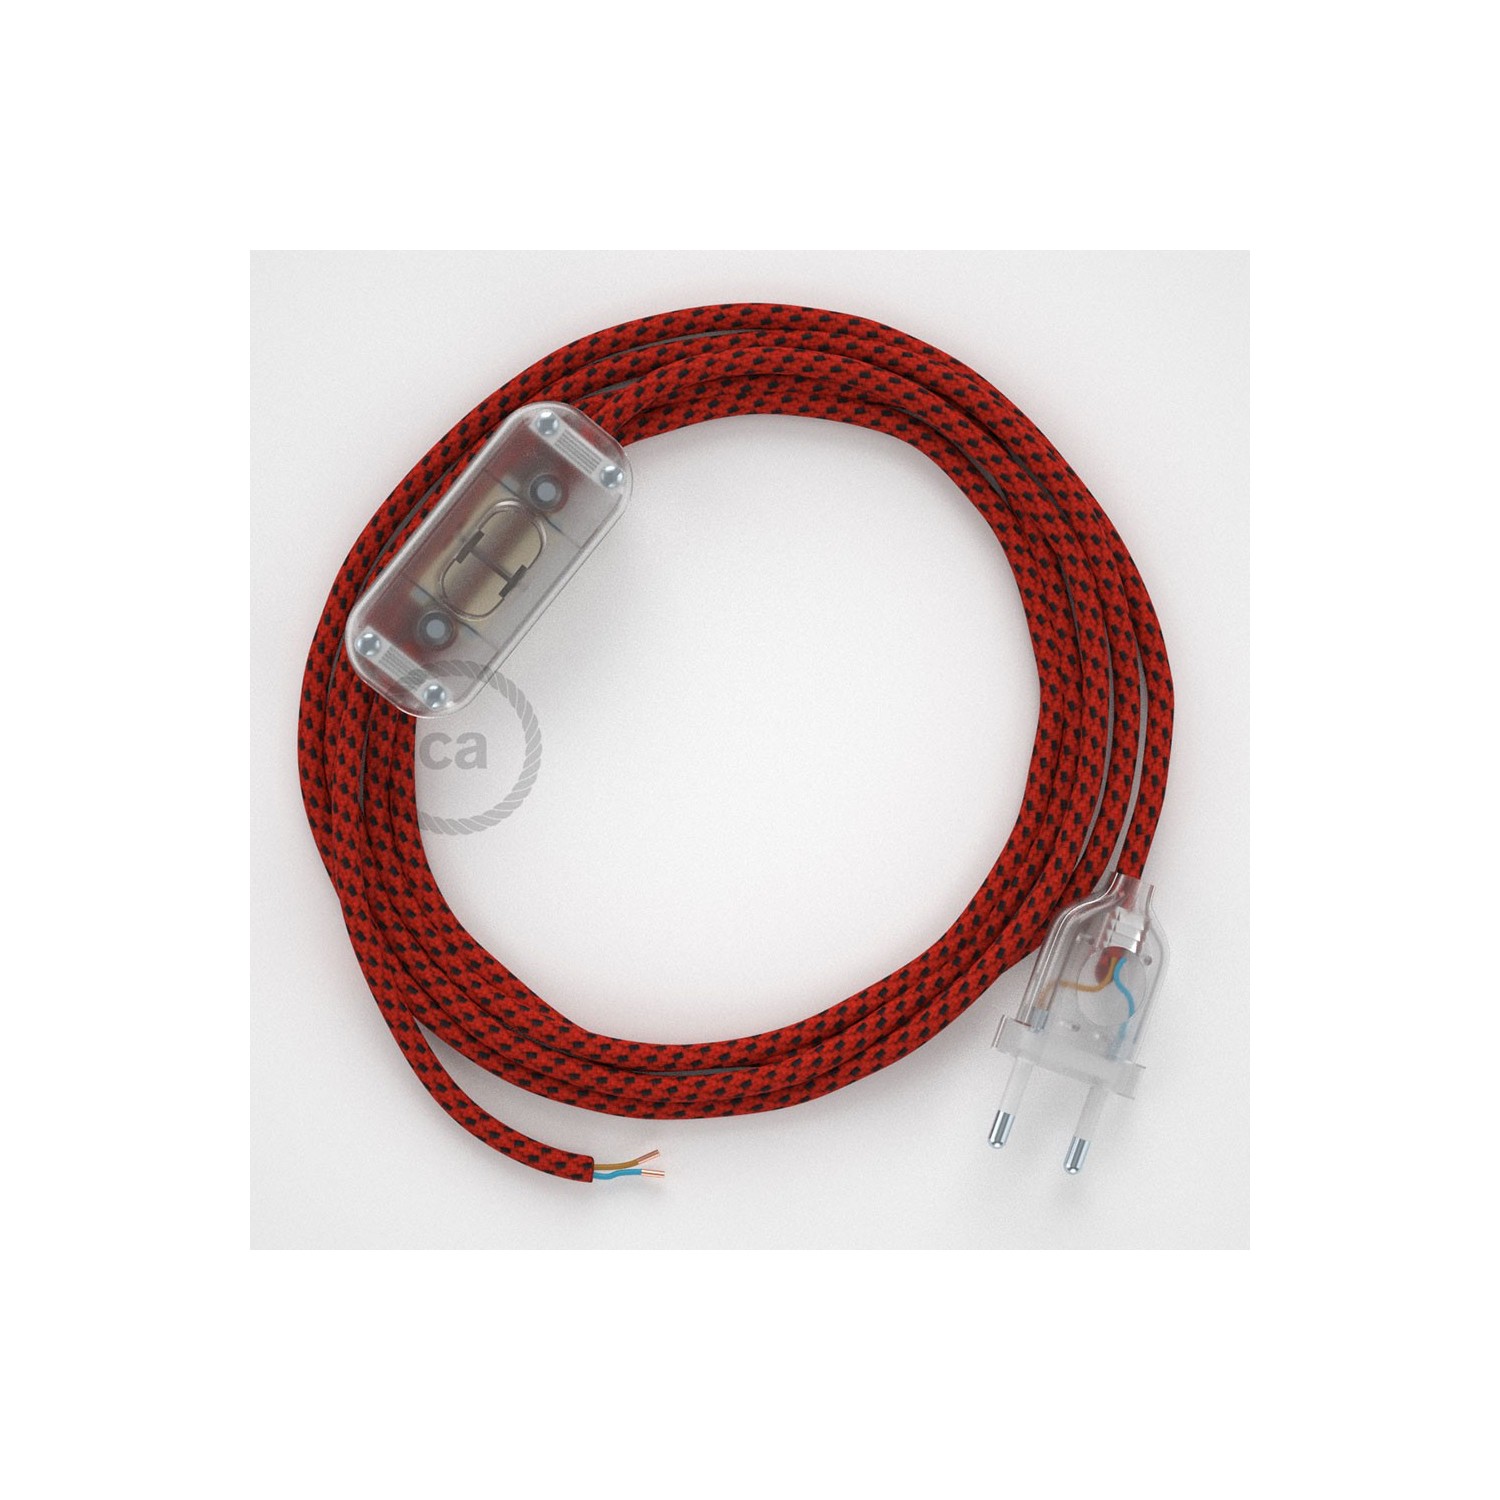 Lamp wiring, RT94 Red Devil Rayon 1,80 m. Choose the colour of the switch and plug.